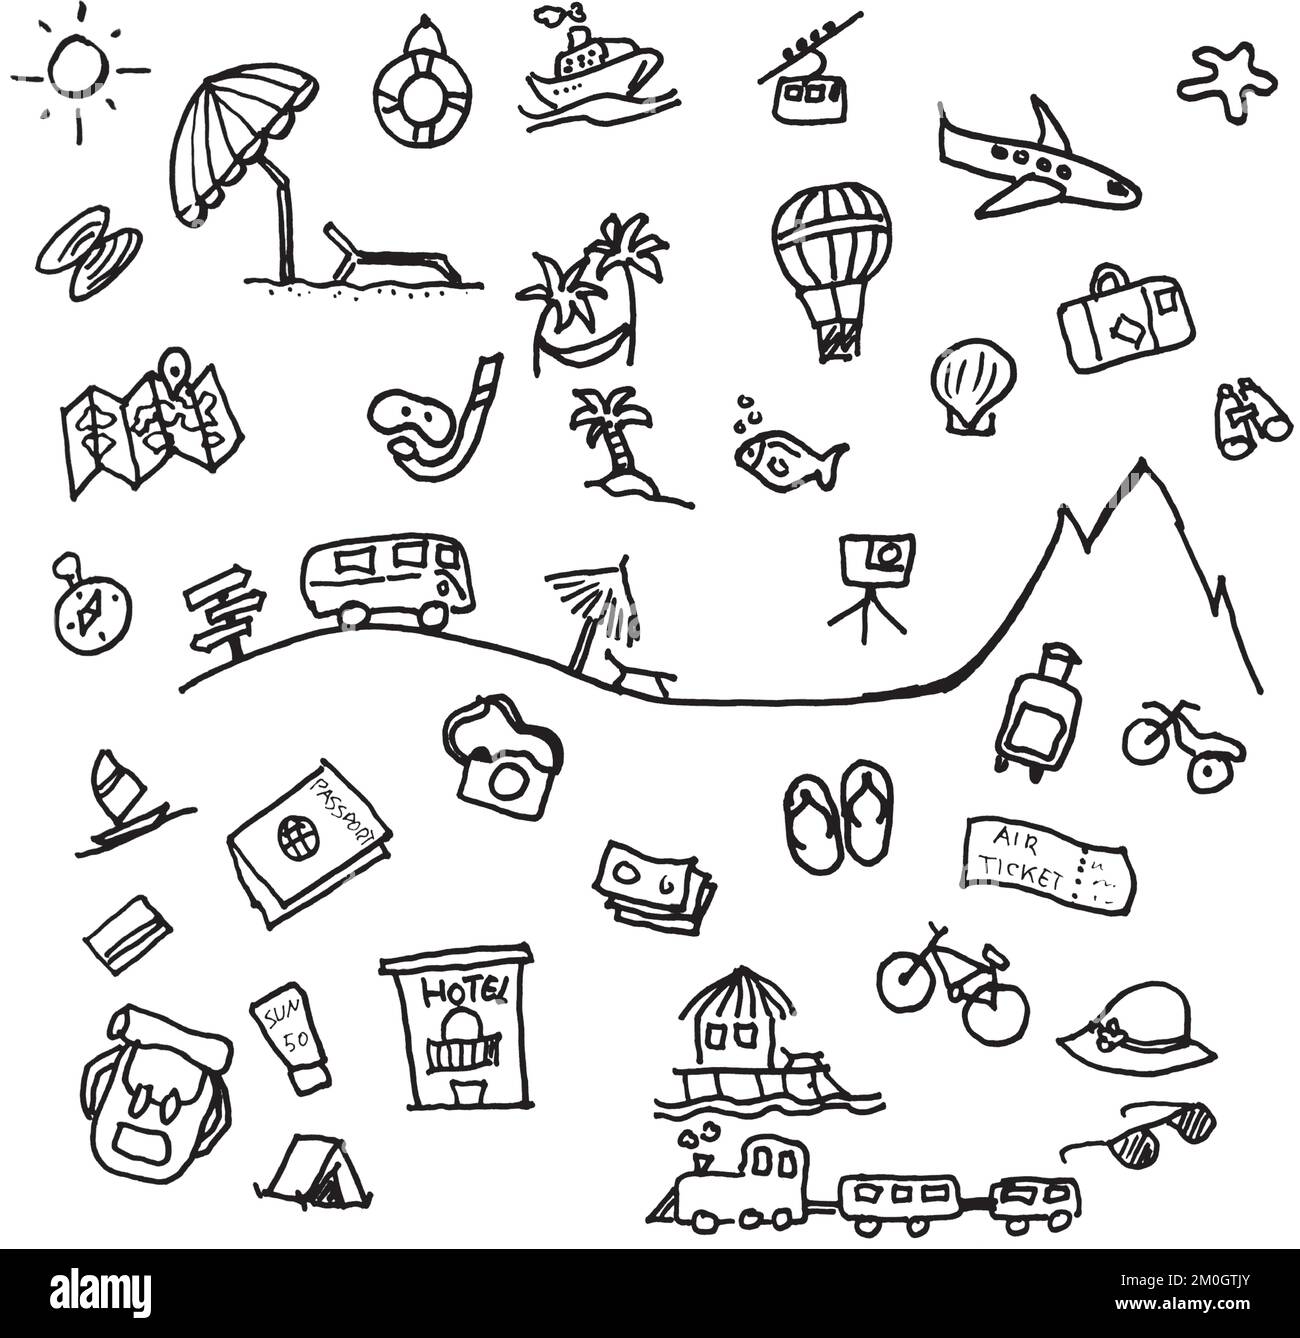 Travel freehand drawn icon set collection Stock Vector